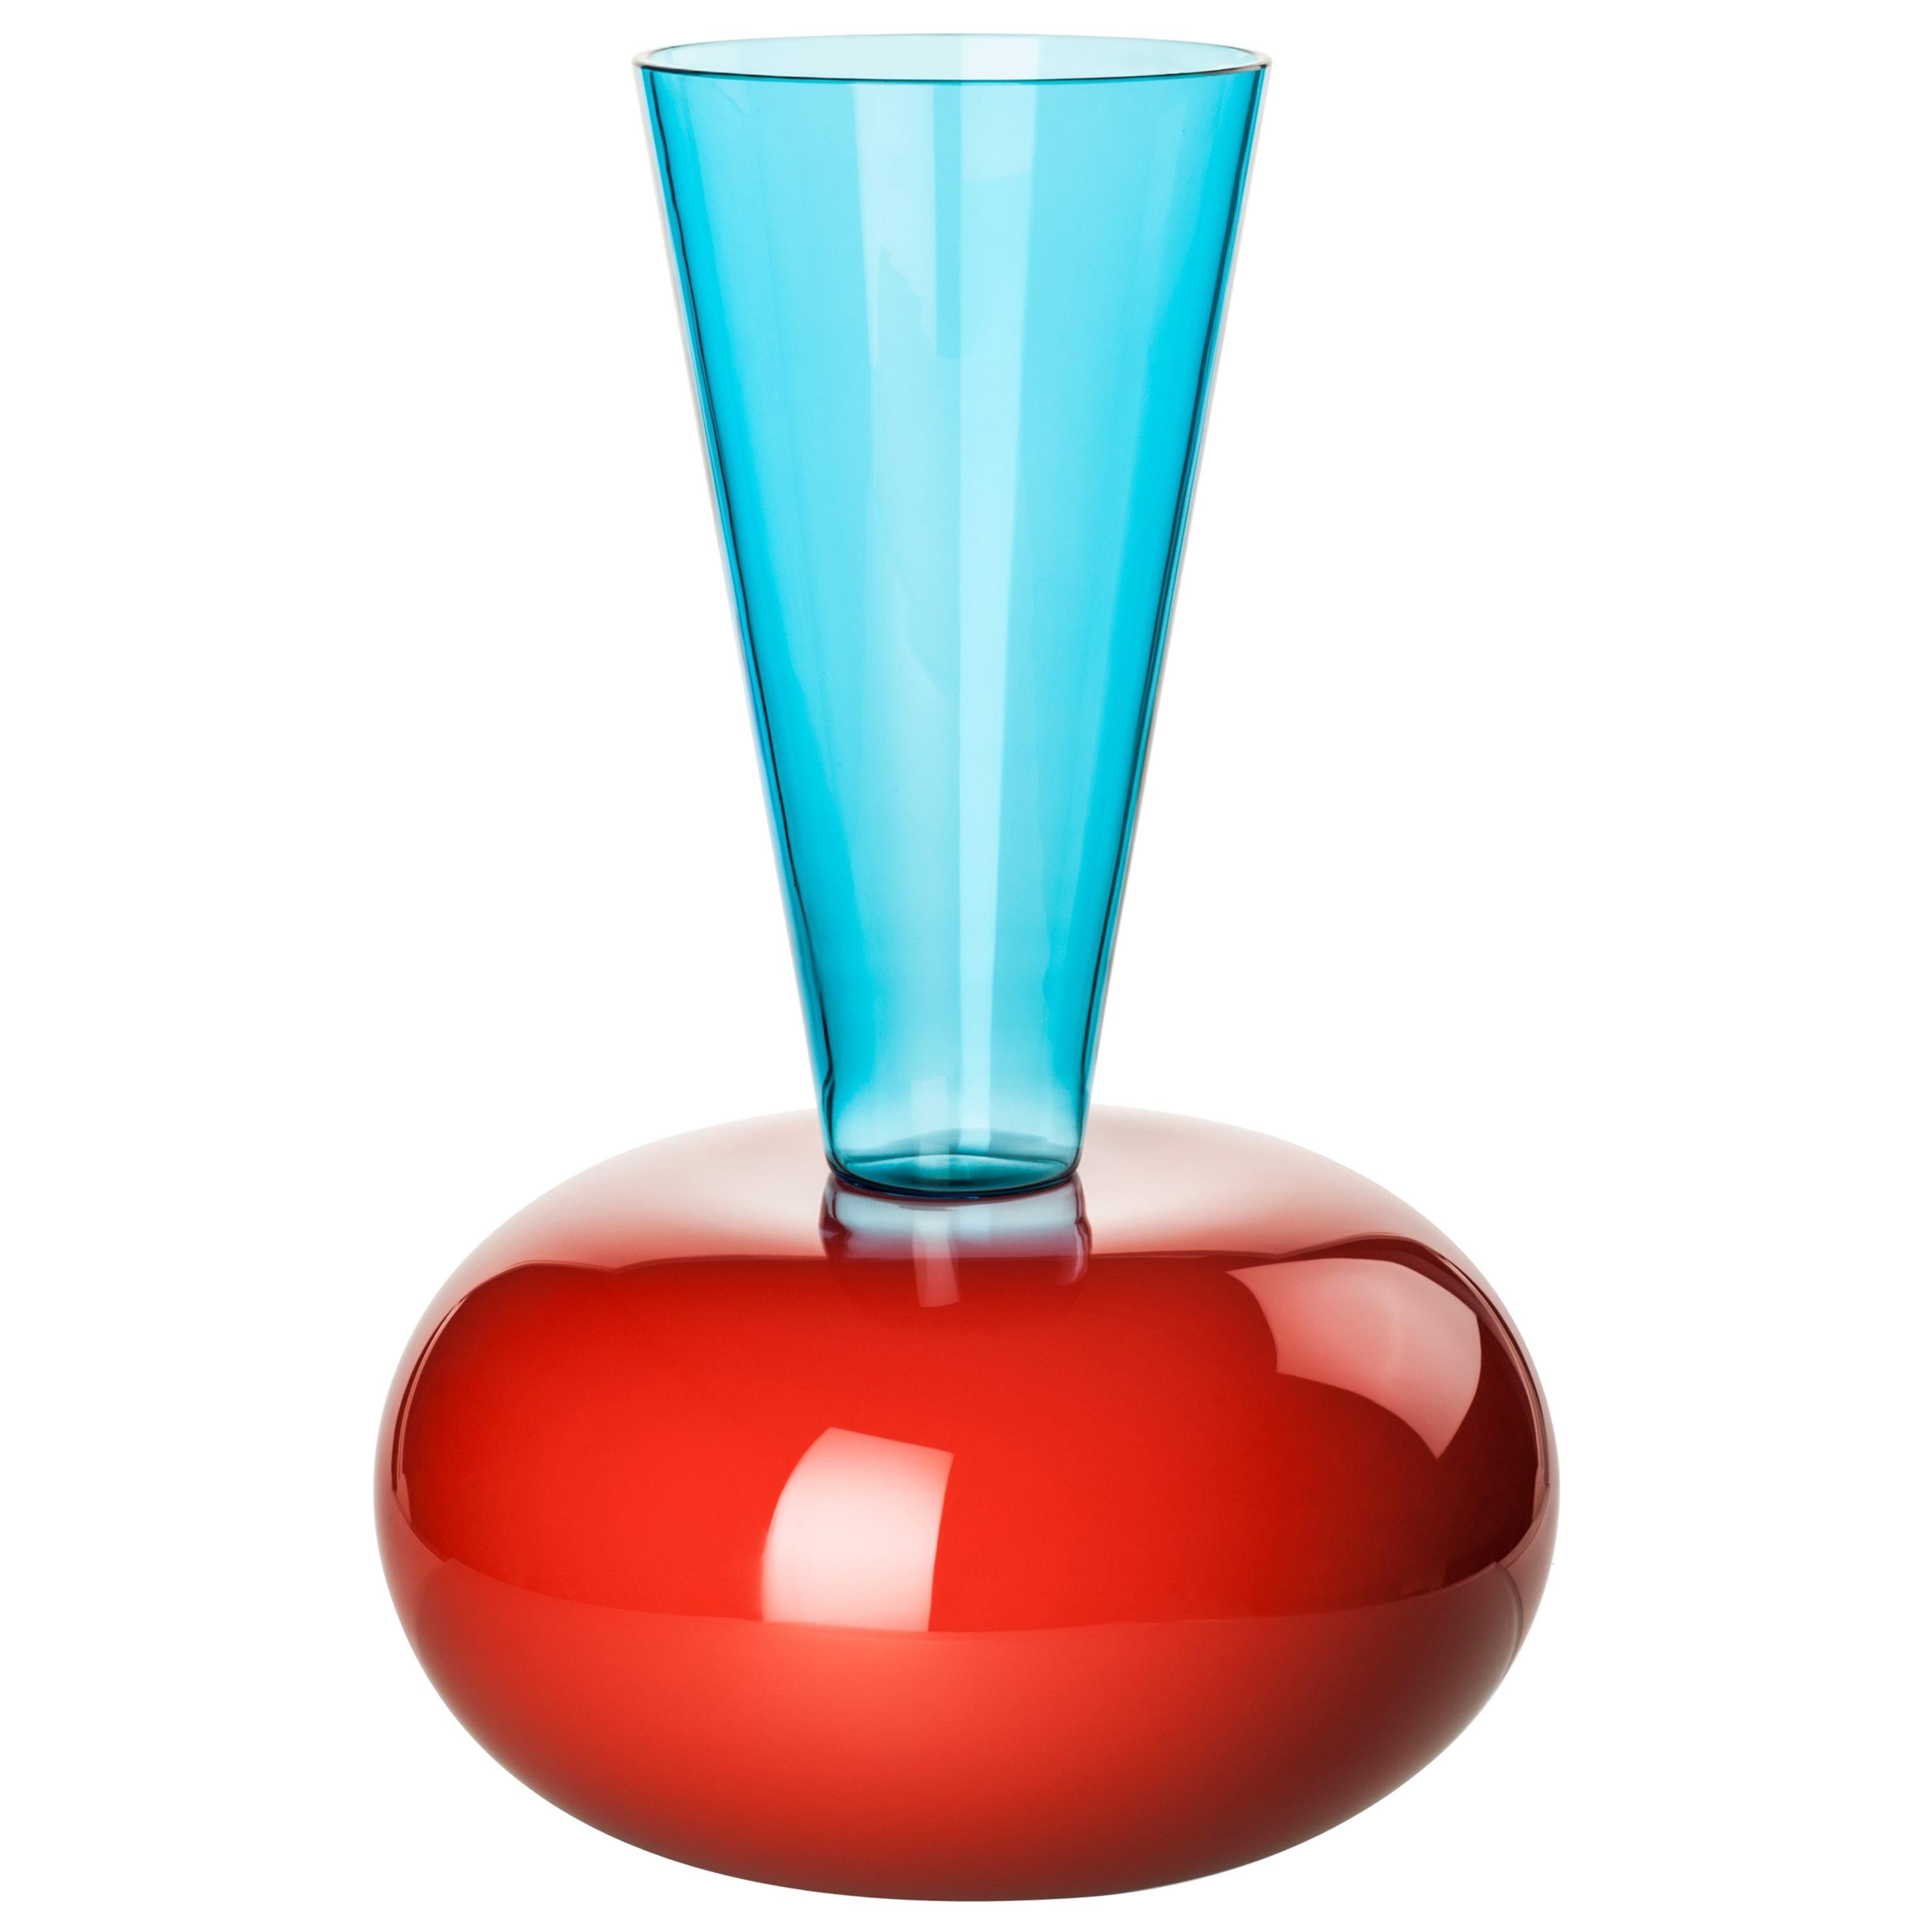 Venini Puzzle Vase in Coral & Aquamarine Glass by Ettore Sottsass For Sale